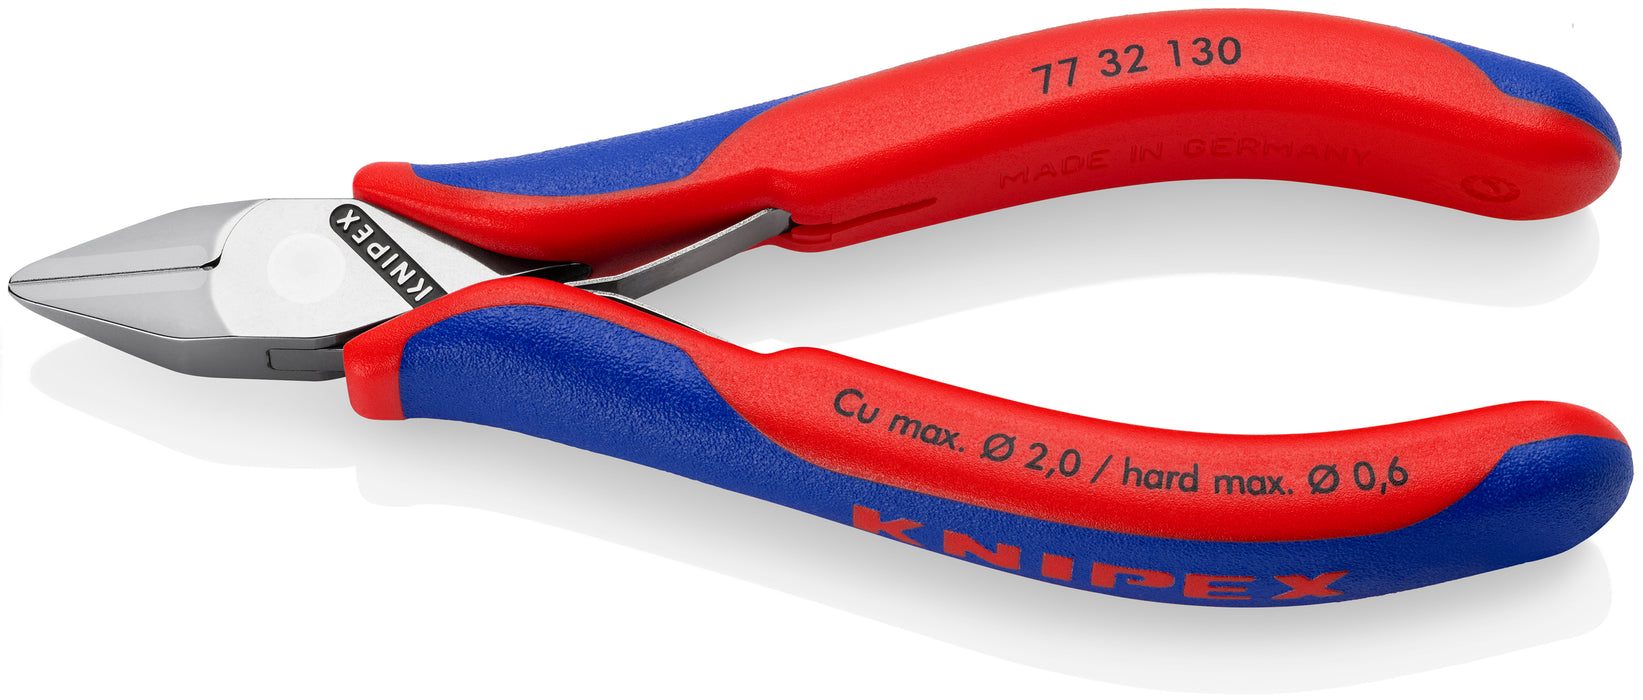 Knipex 77 32 130 Electronics Diagonal Cutter with multi-component grips 130 mm